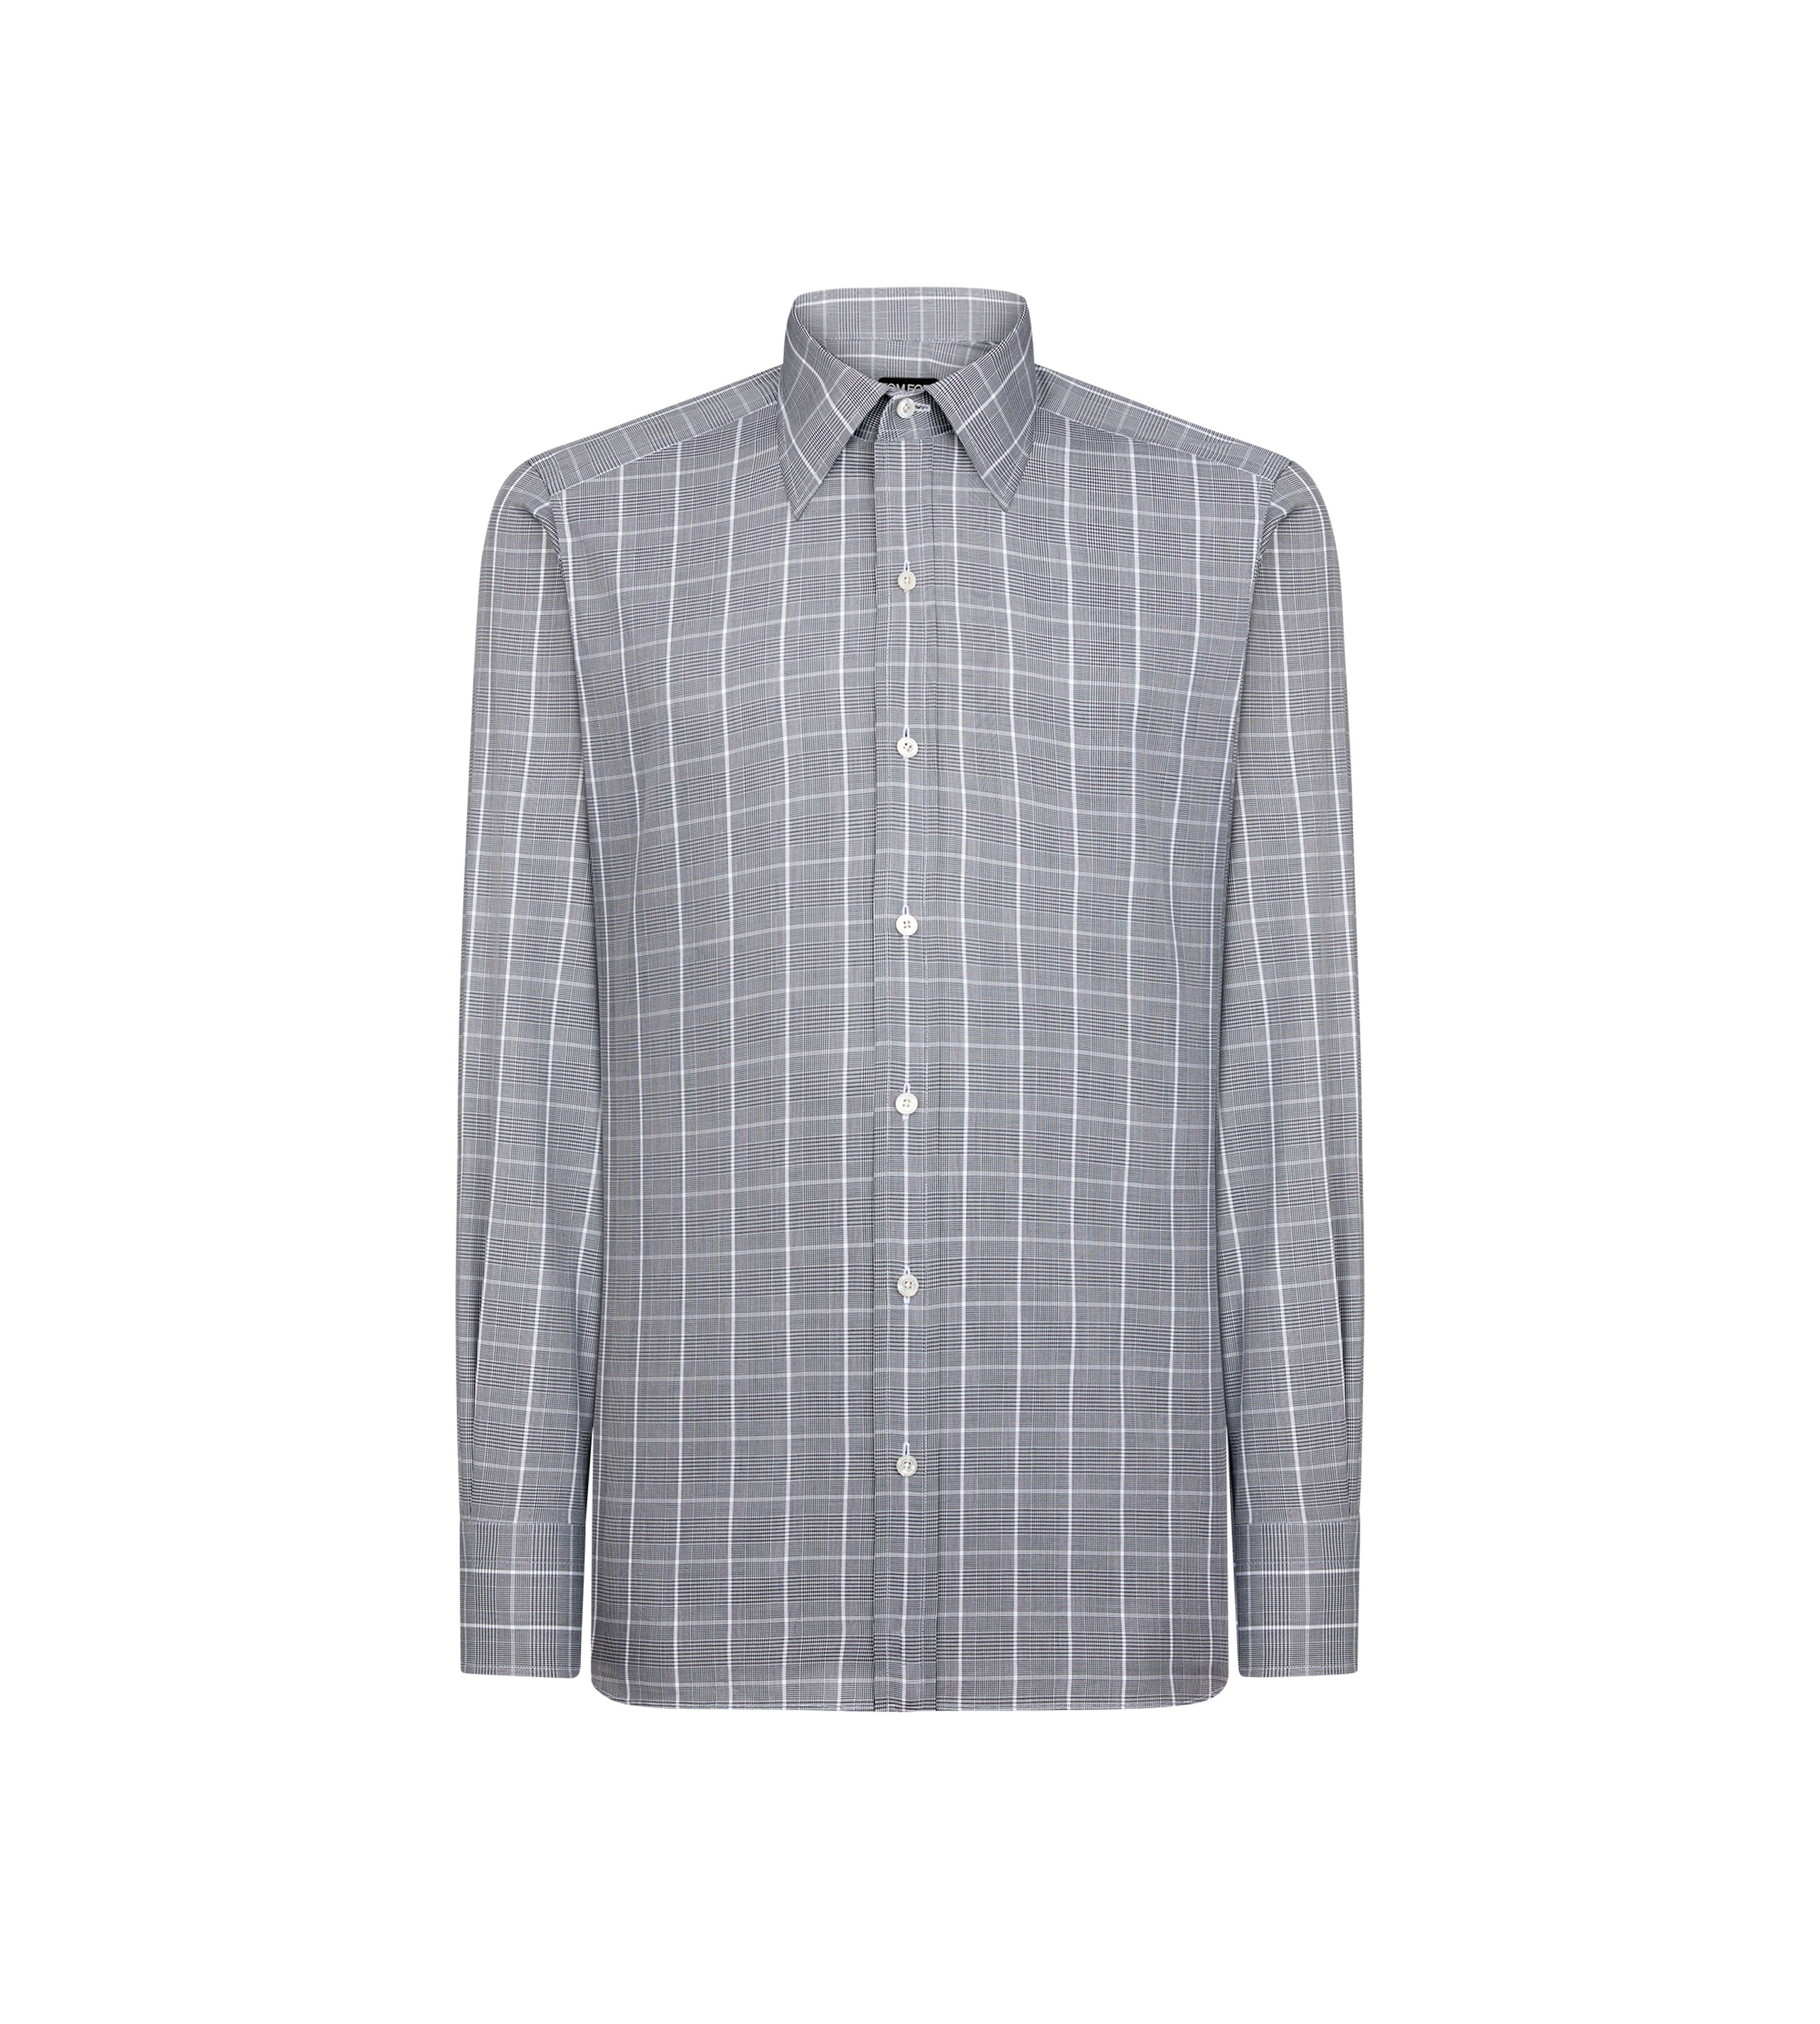 FINE PRINCE OF WALES SLIM FIT SHIRT - 1